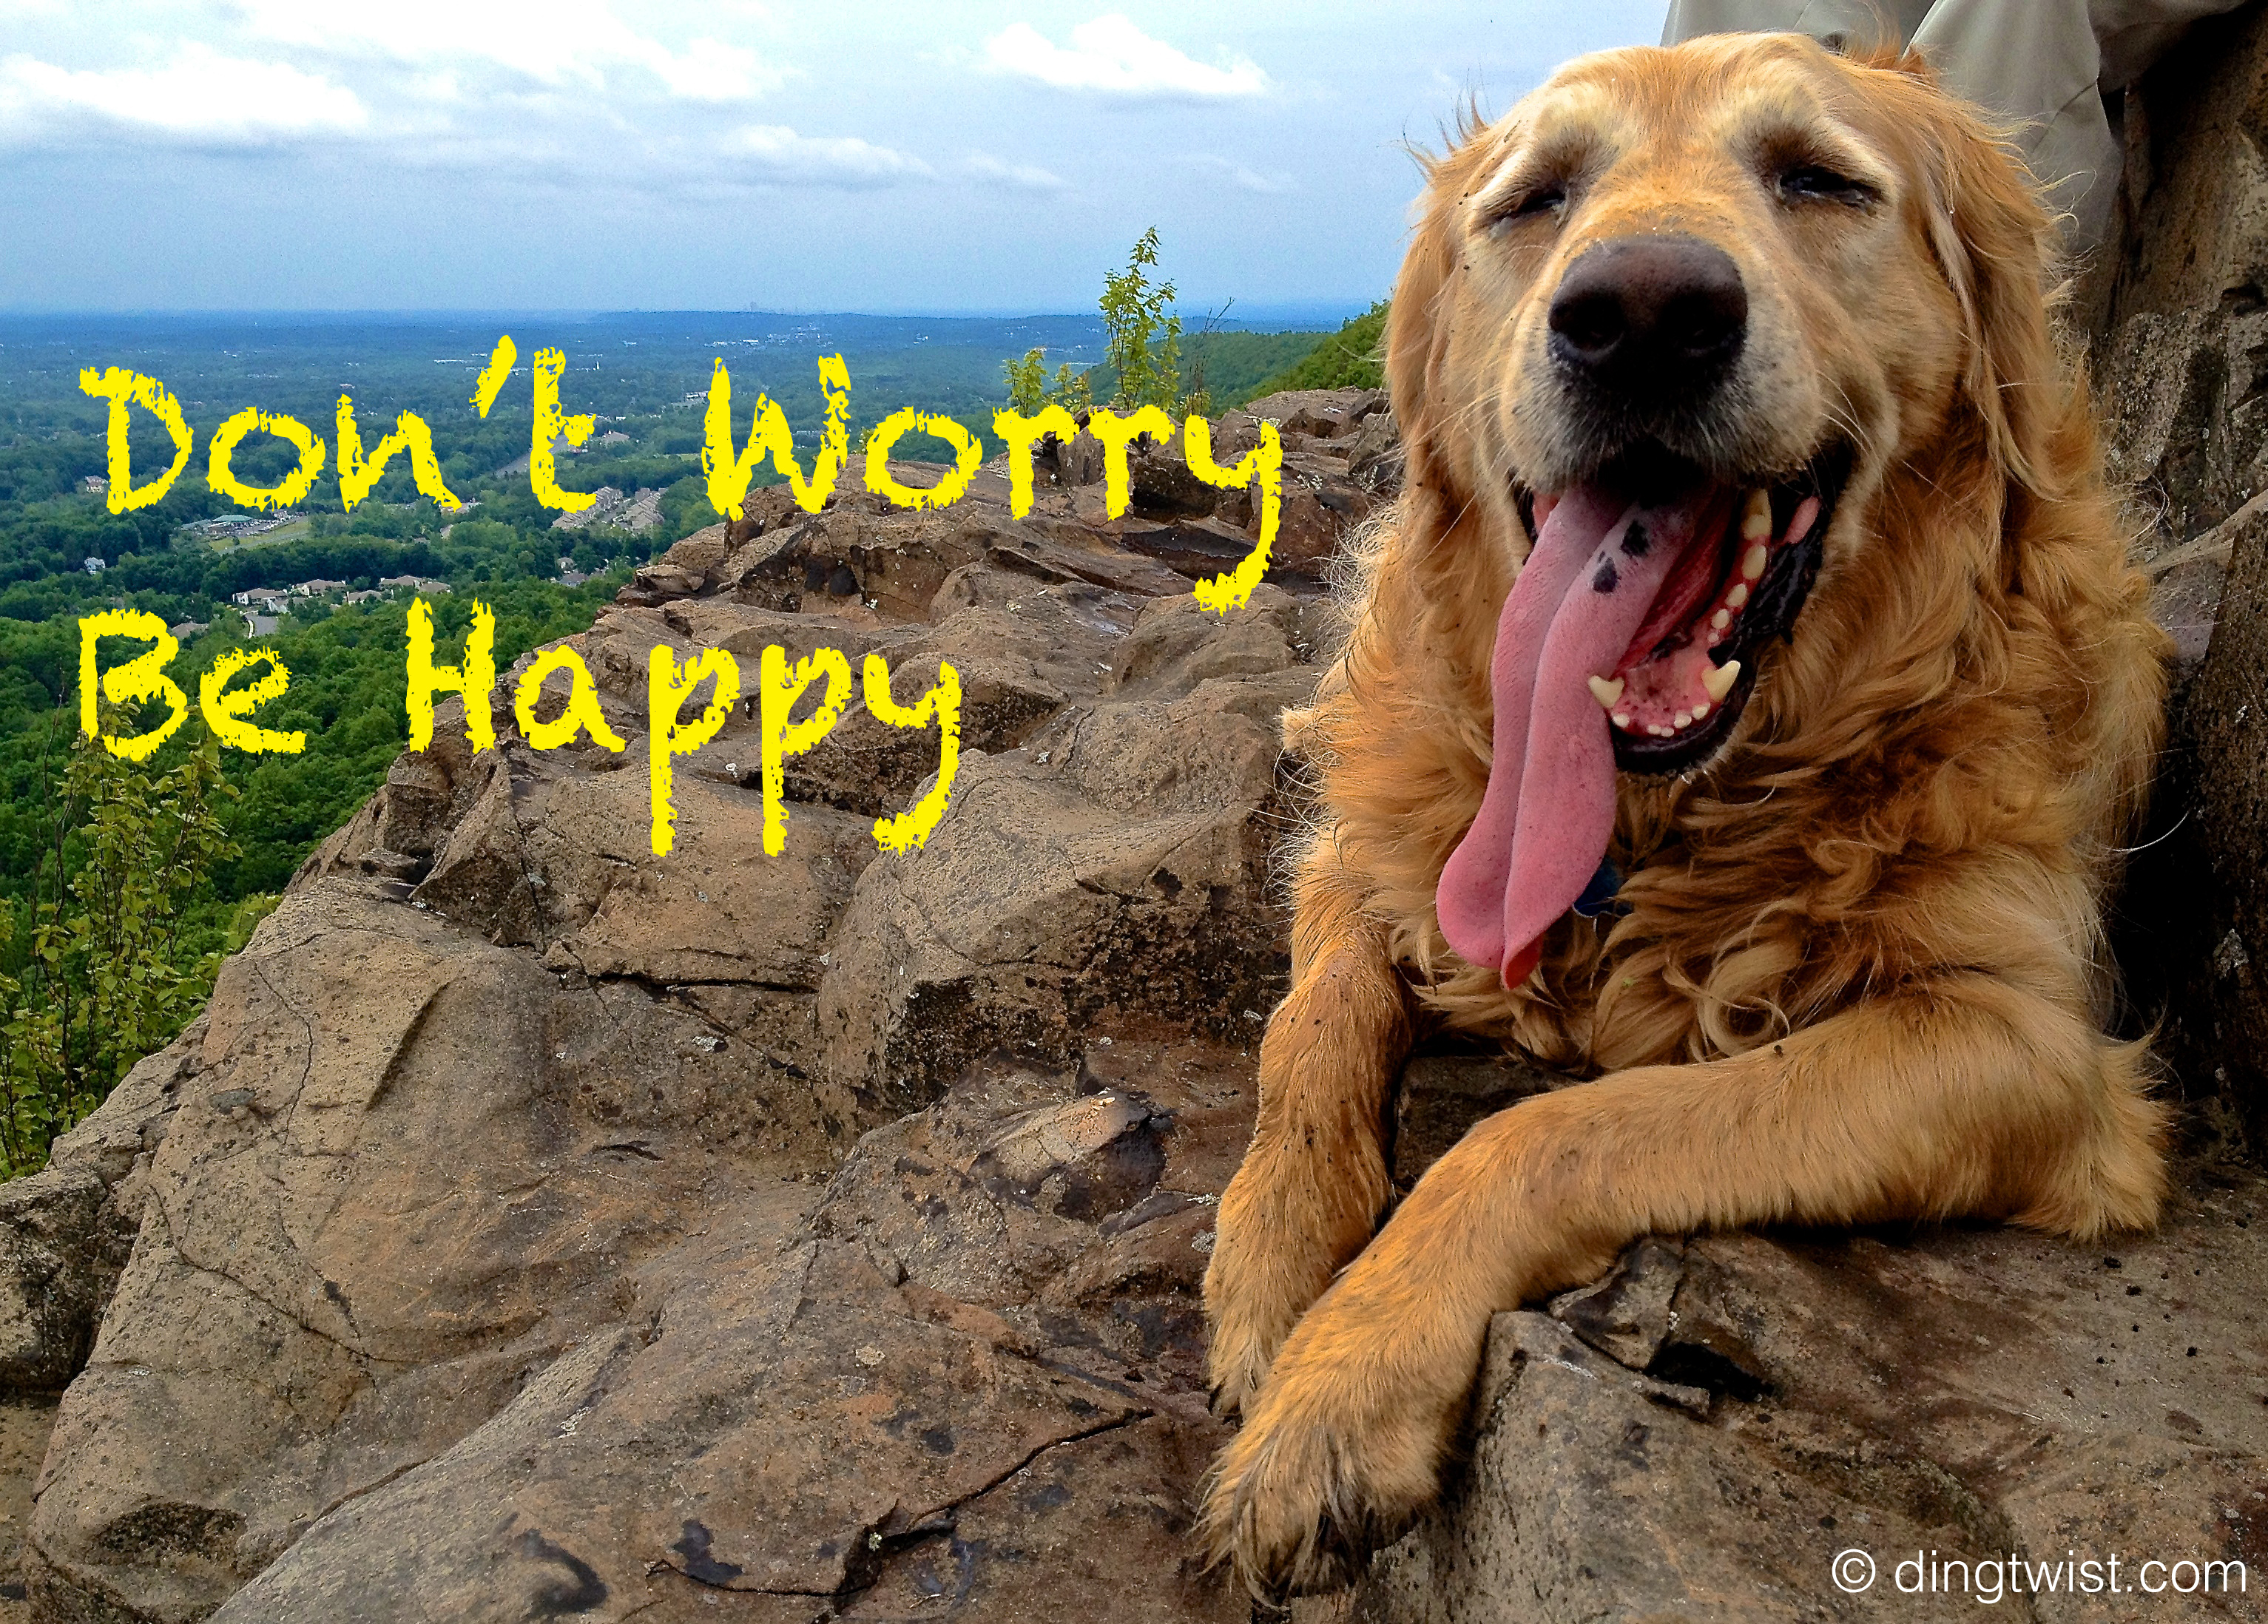 Be happy com. Don`t worry be Happy. Don't worry be Happy картинки. Донт вори би Хэппи. Надпись don't worry be Happy.